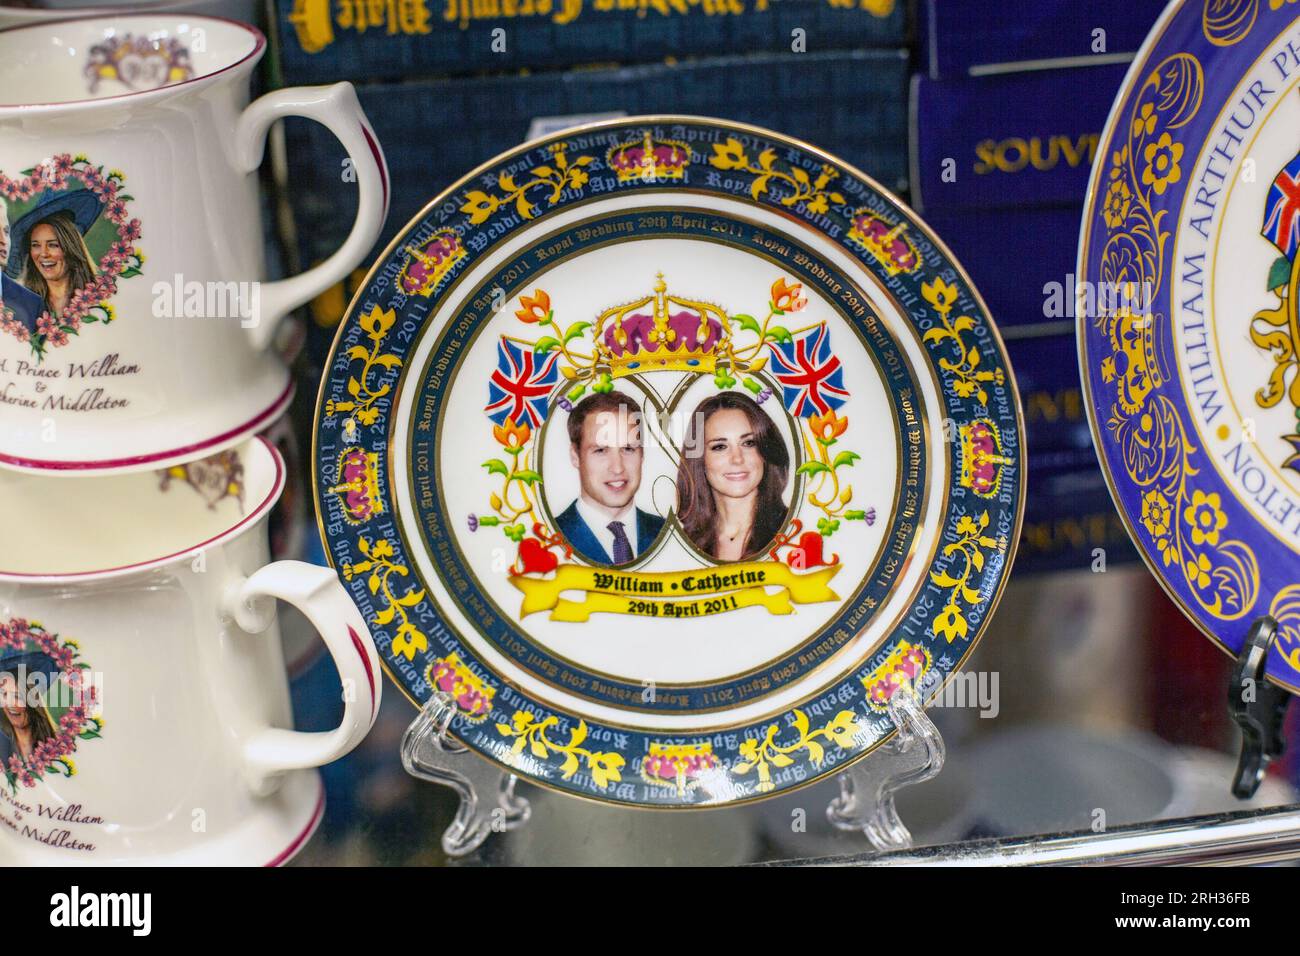 Plate featuring the portrait of Catherine, Duchess of Cambridge, and her husband Prince William is displayed at a souvenir store in London ,UK Stock Photo